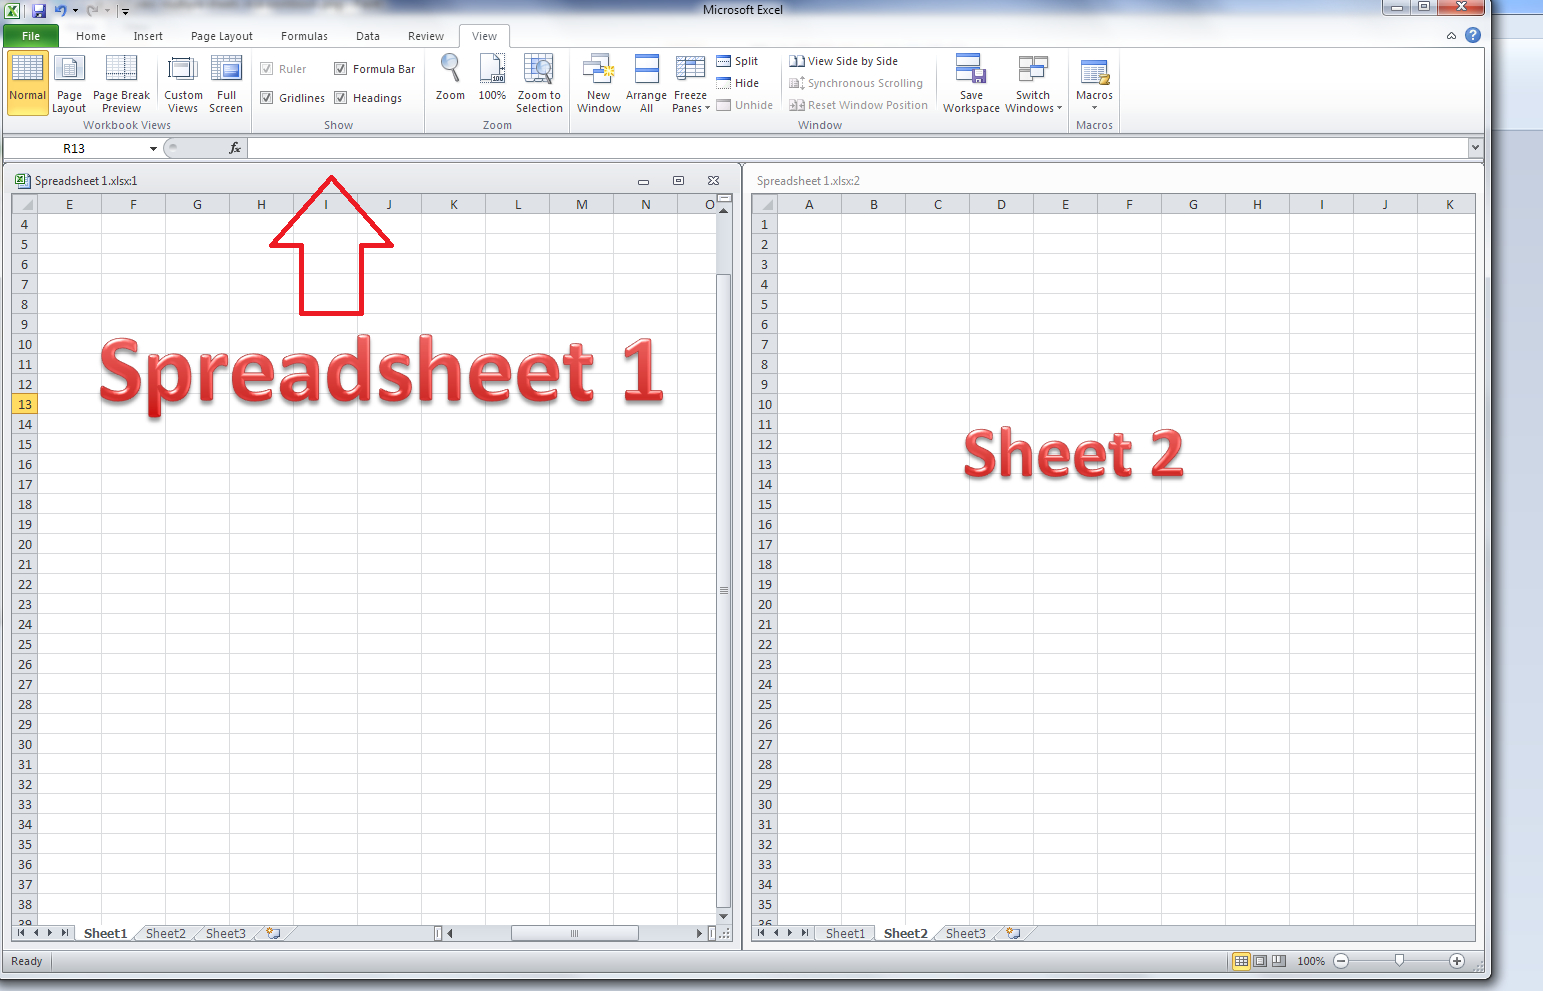 Show Me A Spreadsheet In How Do I View Two Sheets Of An Excel Workbook At The Same Time